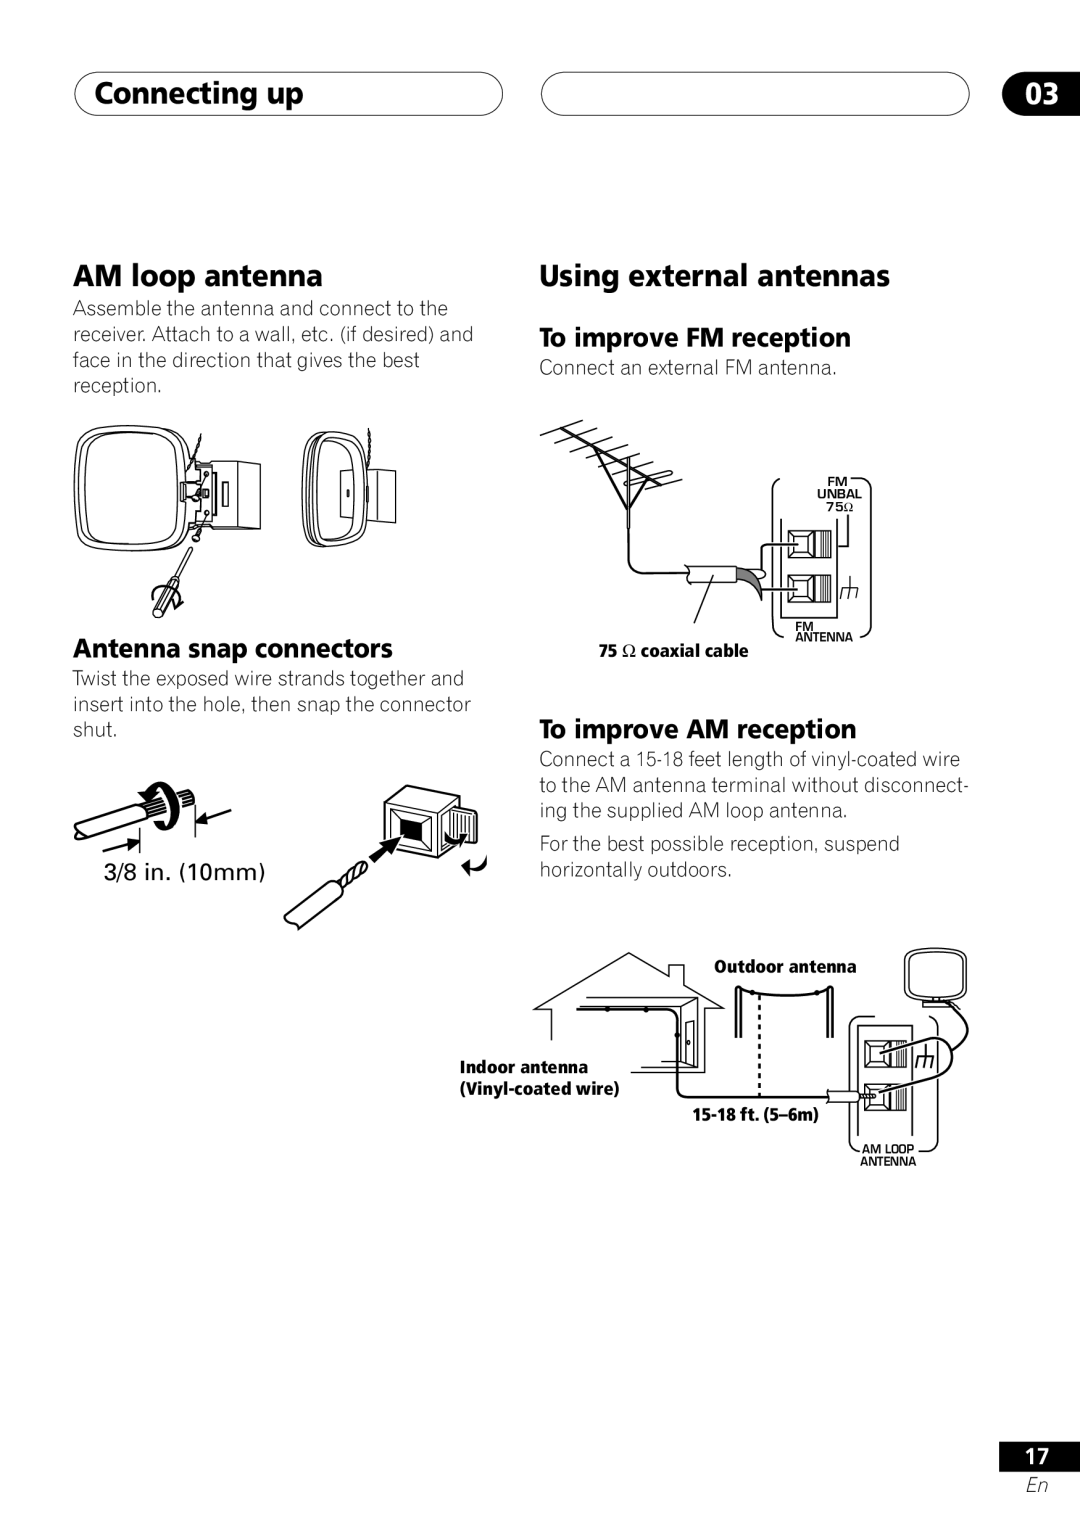 Pioneer vsx-d412 Connecting up AM loop antenna, Using external antennas, To improve FM reception, Antenna snap connectors 